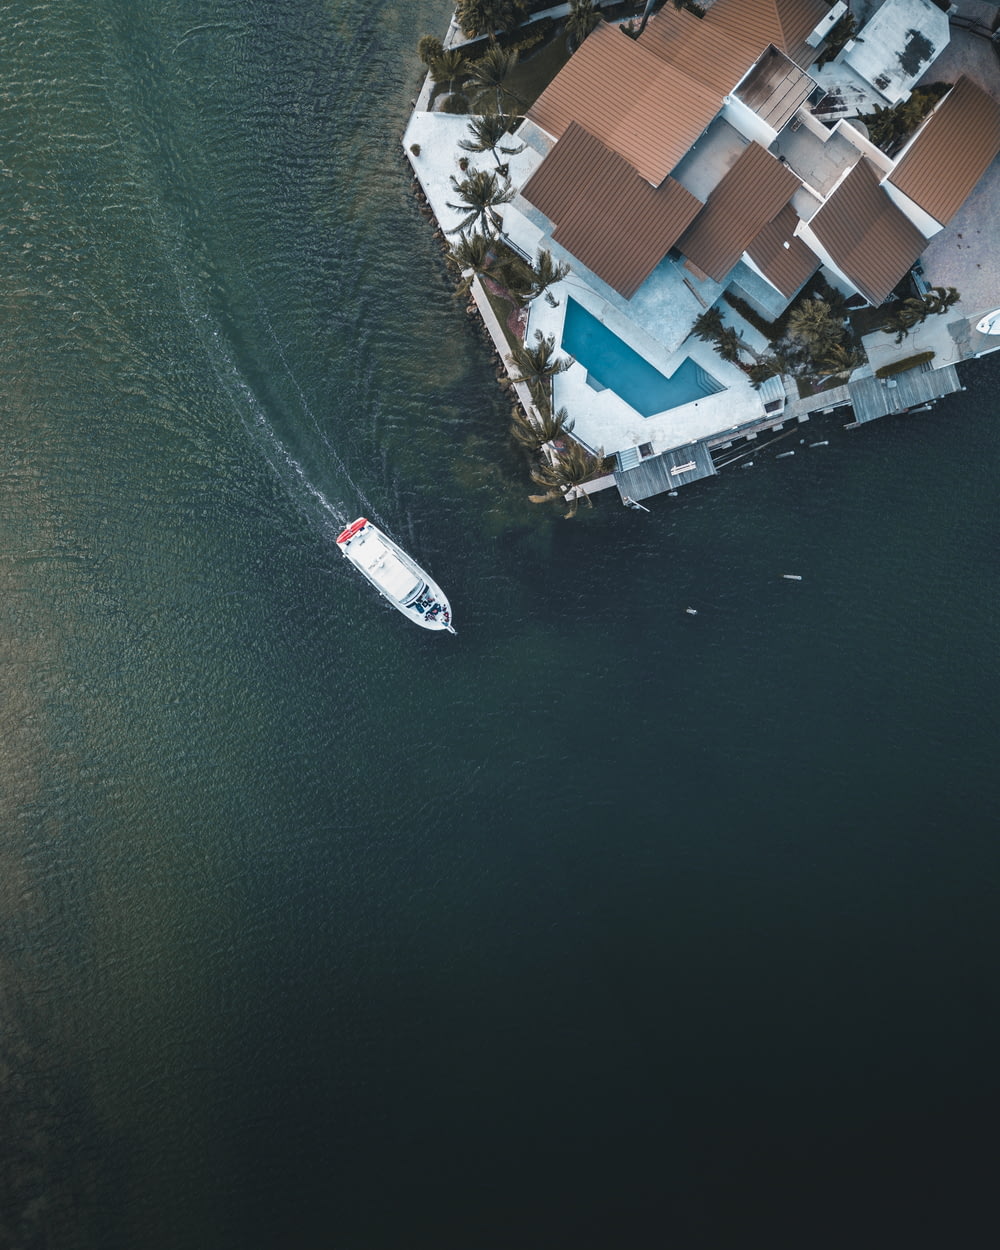 bird's eye view of boat on body of water